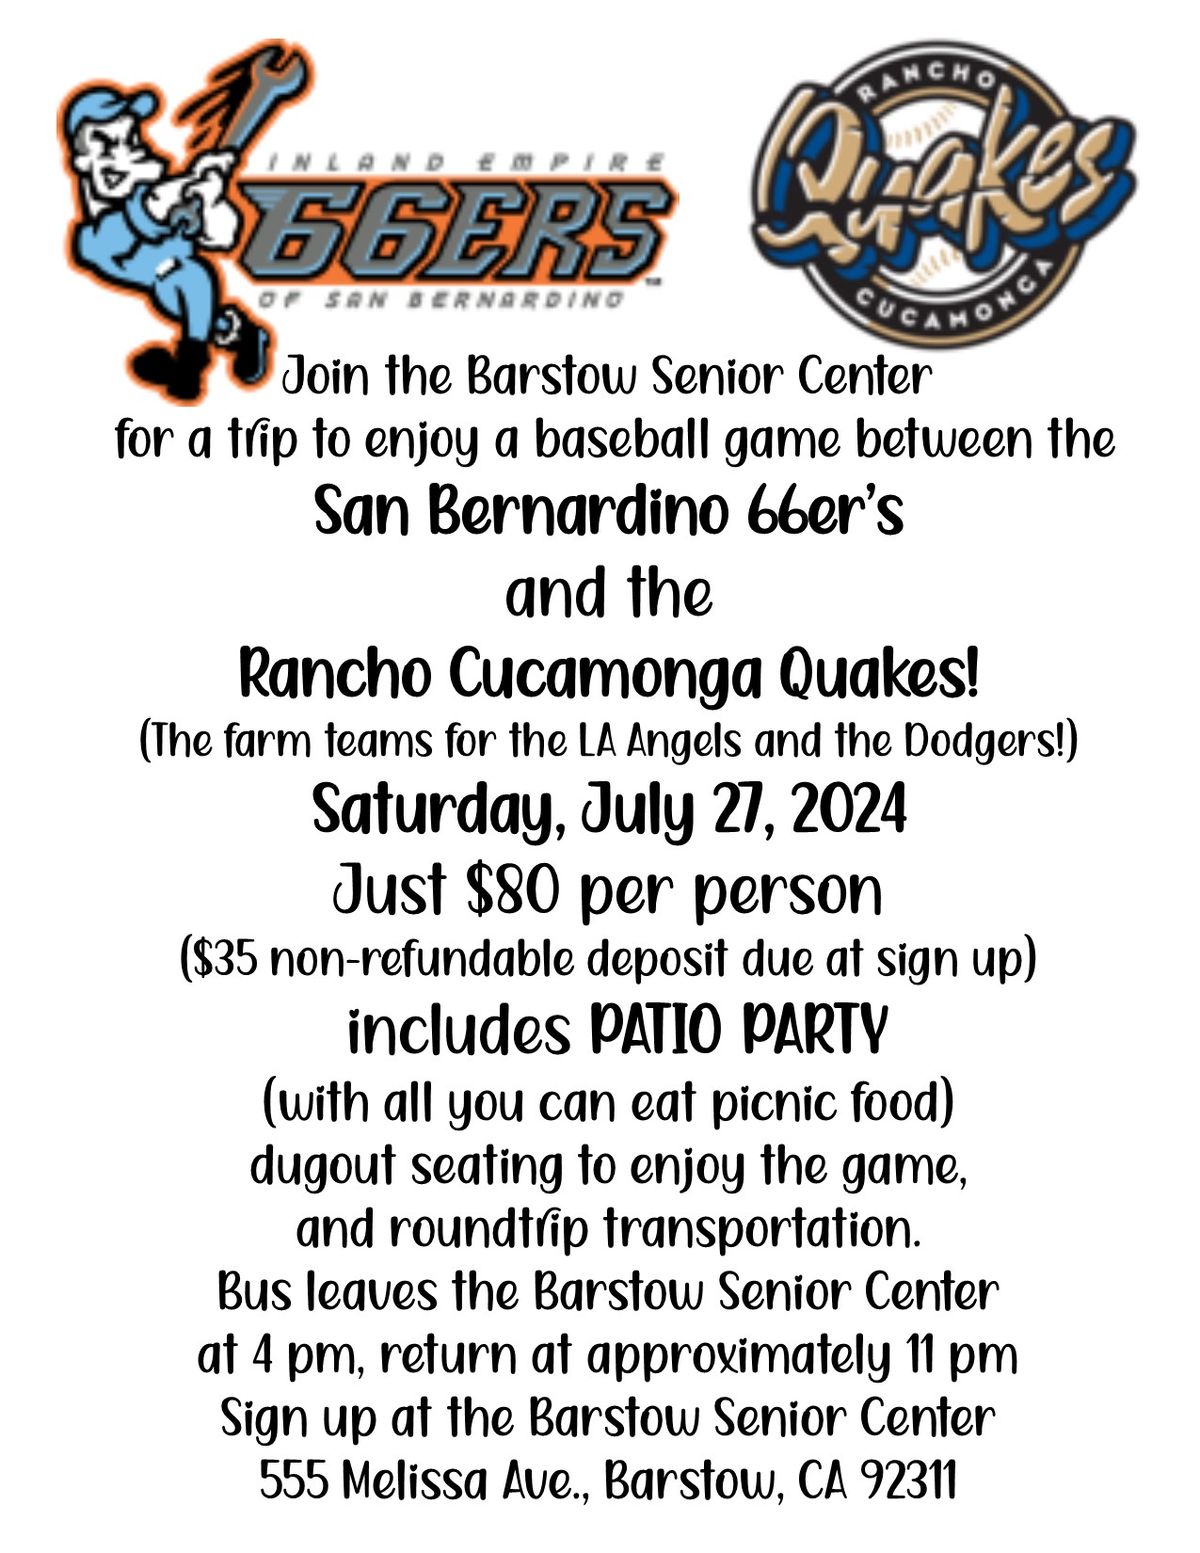 Day Trips with Barstow Senior Center